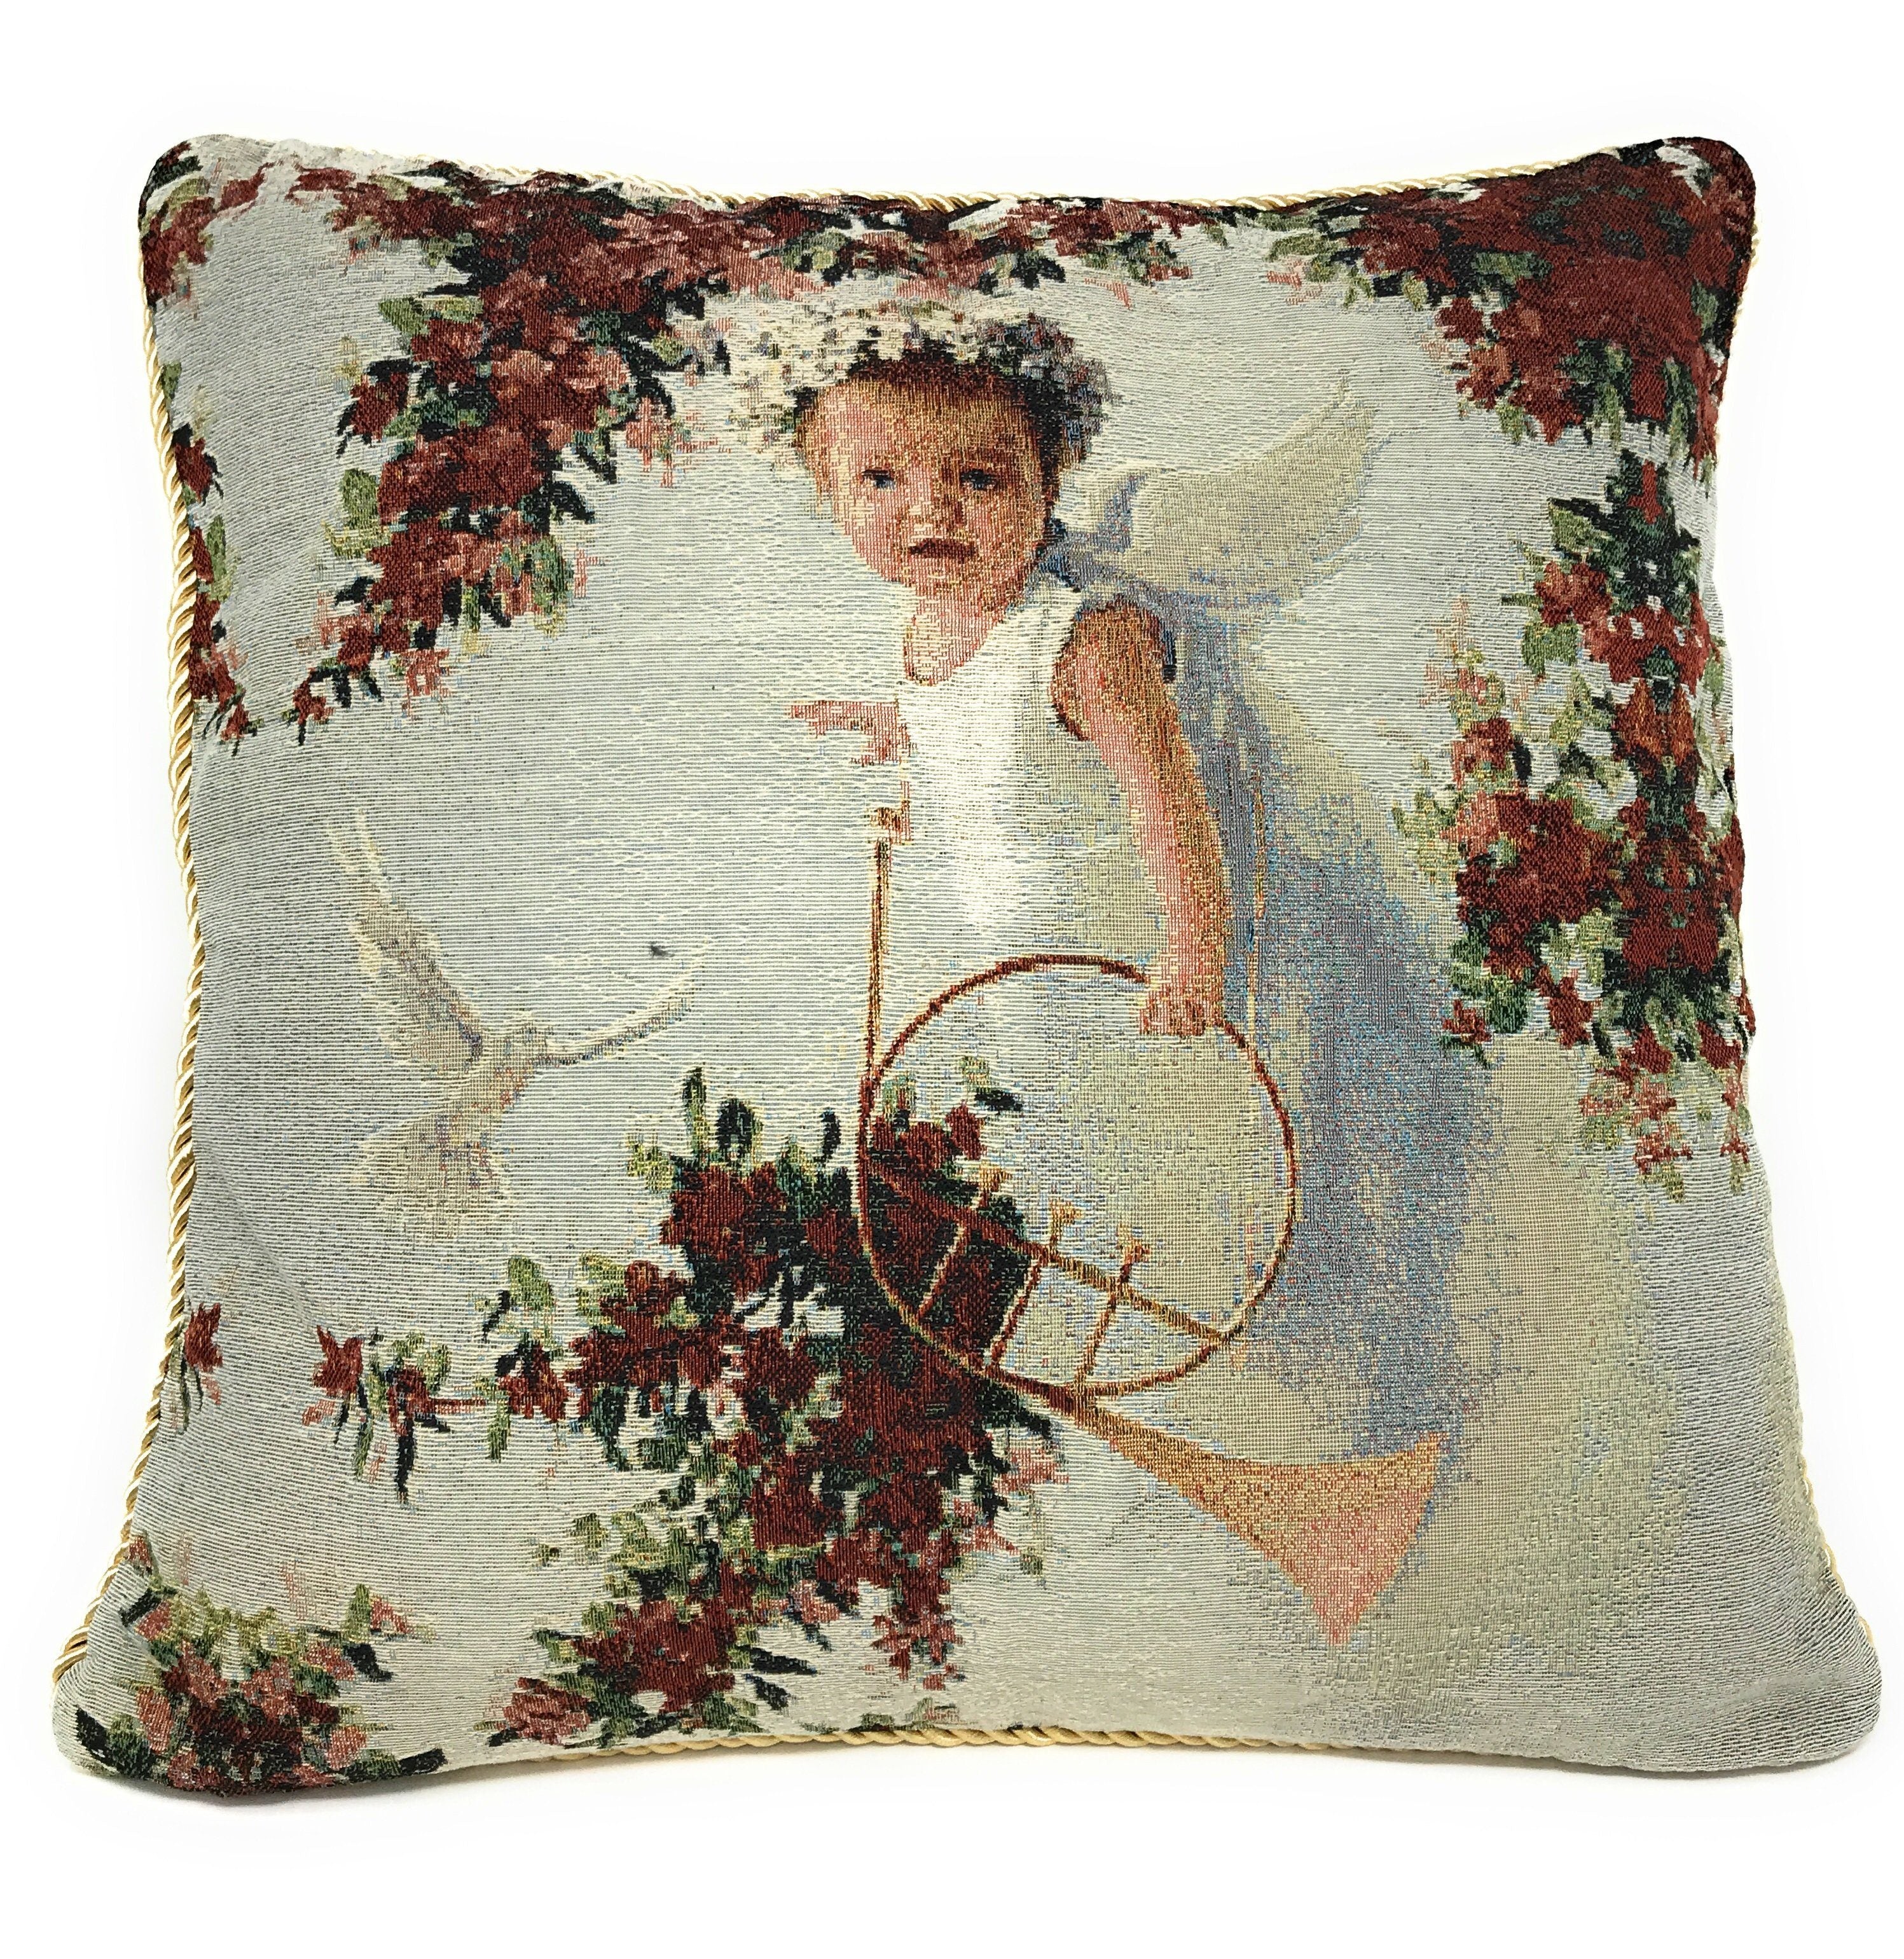 Tache Cupid's Horn Antique Rose Bird Dove Woven Tapestry Throw Pillow Cover (16375) - Tache Home Fashion